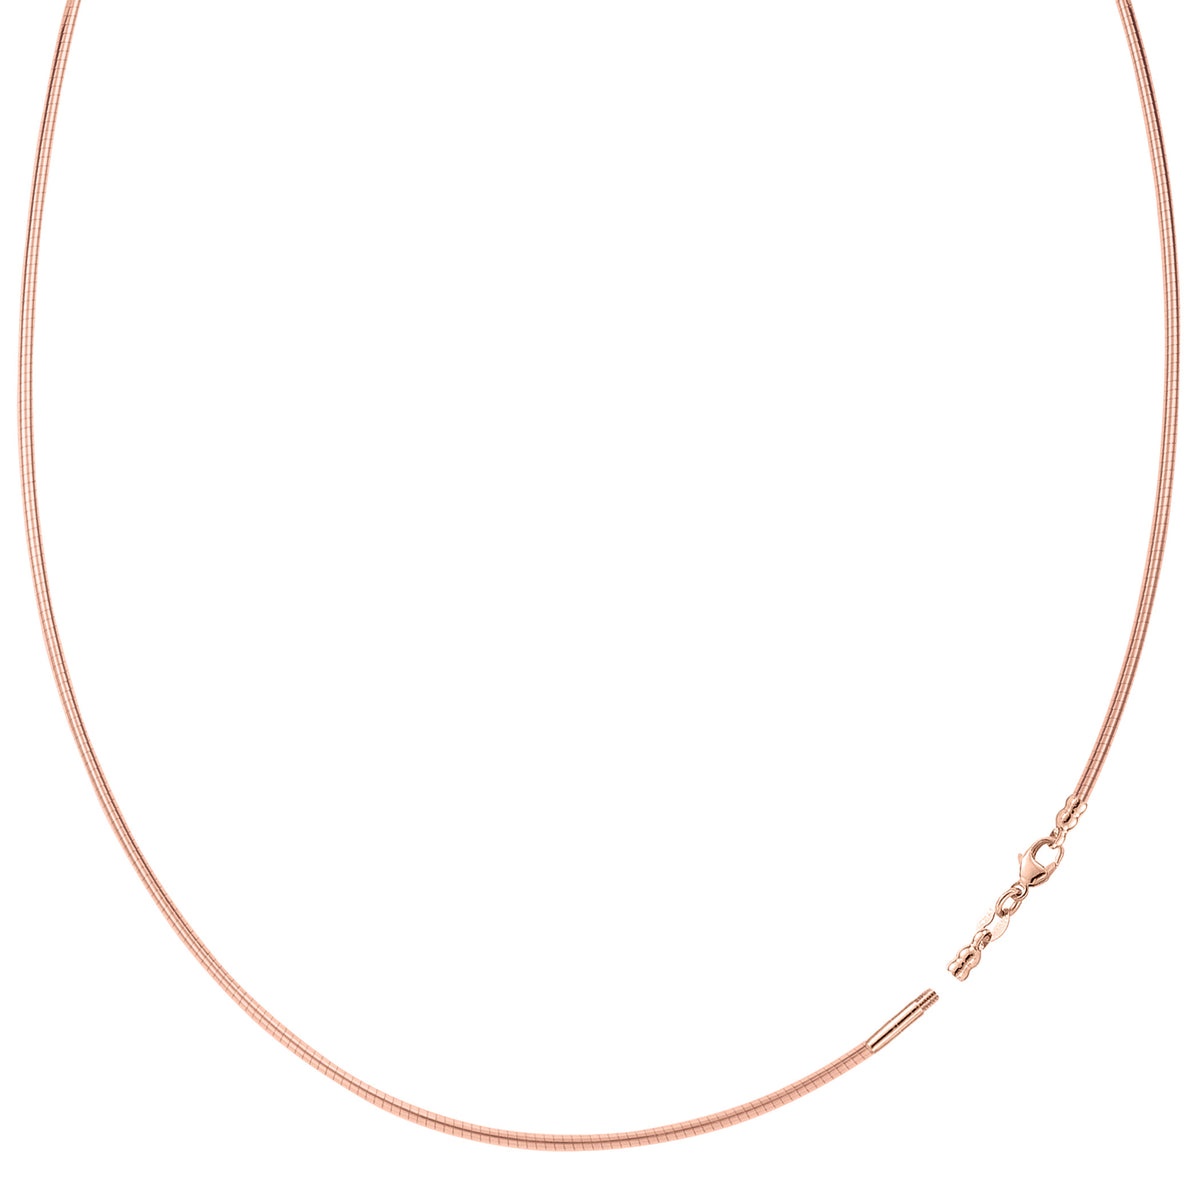 Round Omega Chain Necklace With Screw Off Lock In 14k Rose Gold, 1.5mm, 17" fine designer jewelry for men and women